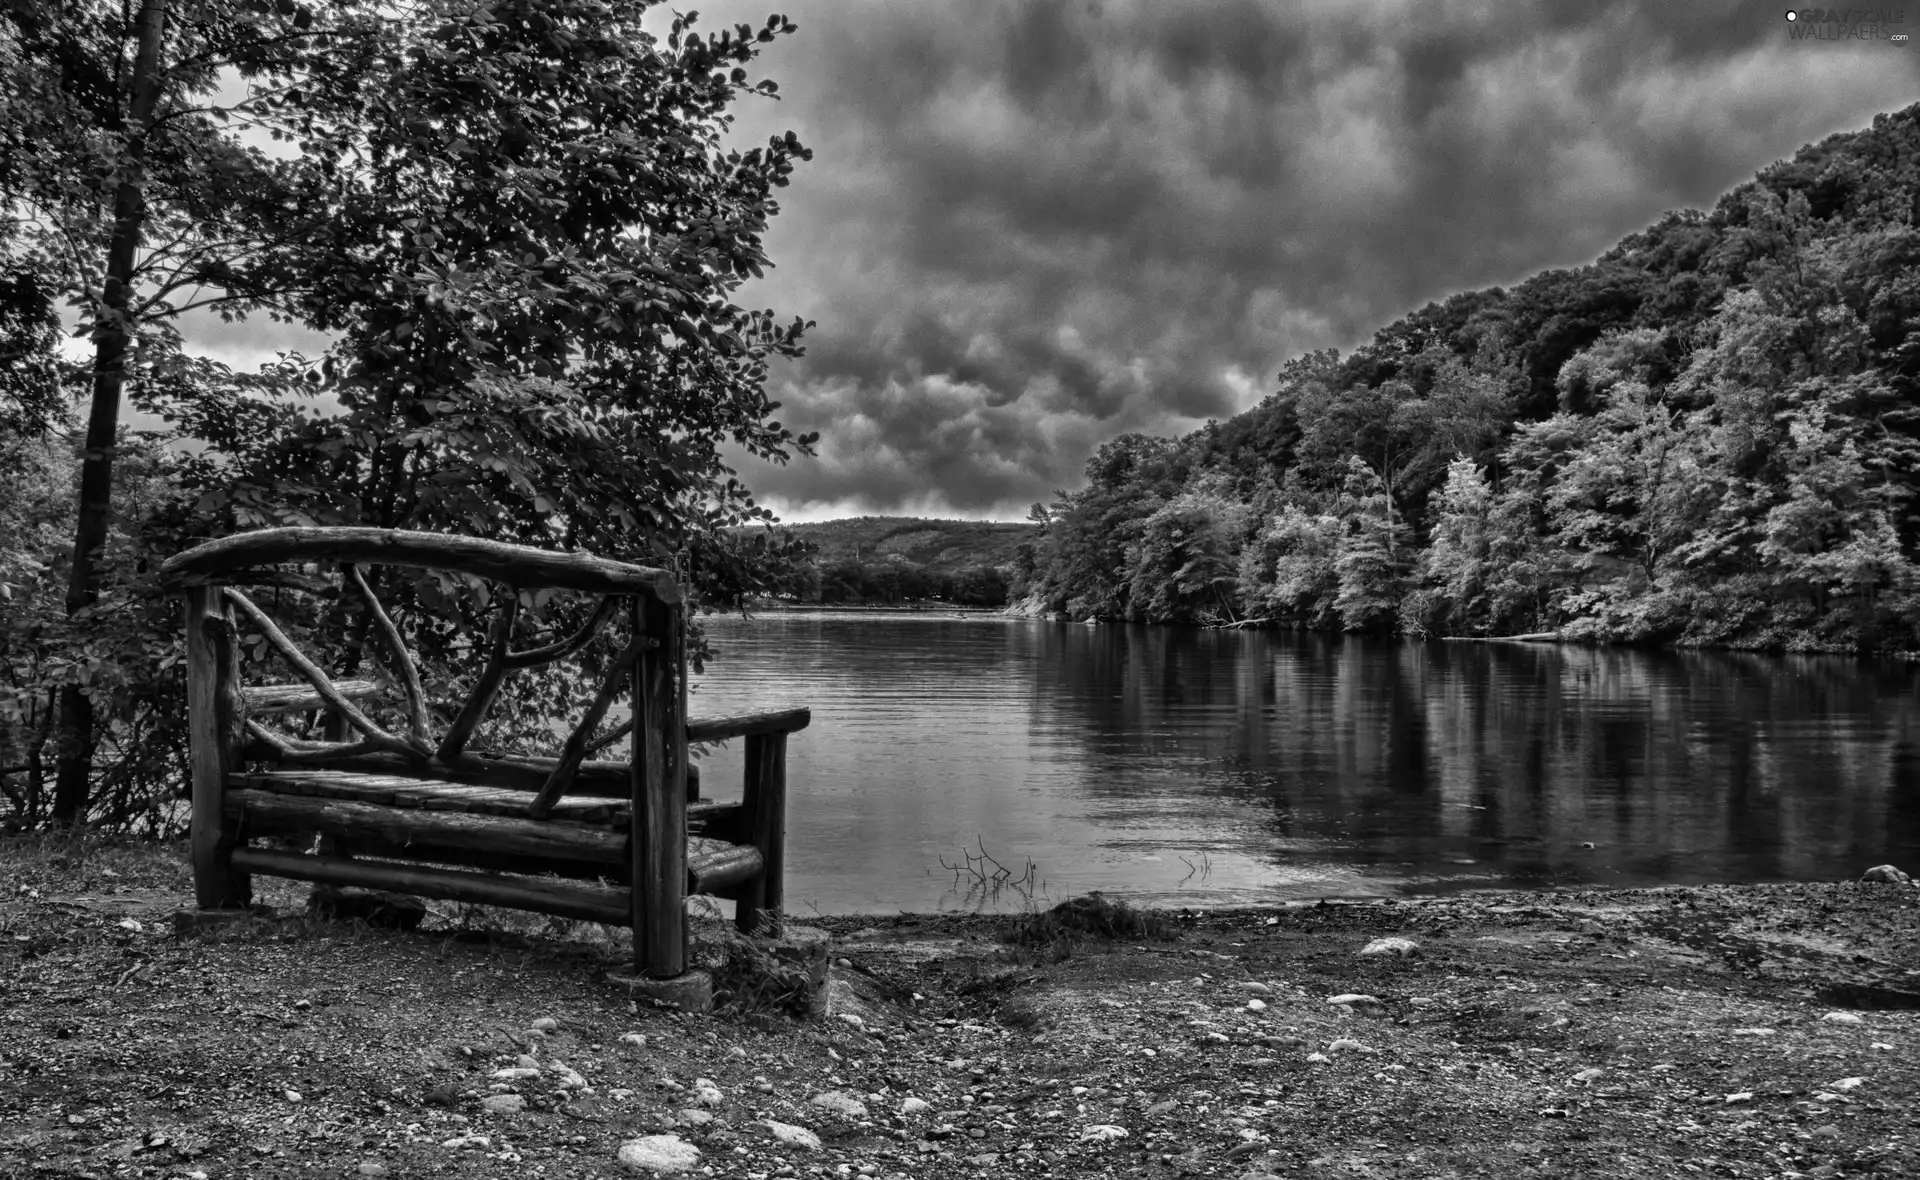 lake, Bench, Mountains, woods, clouds